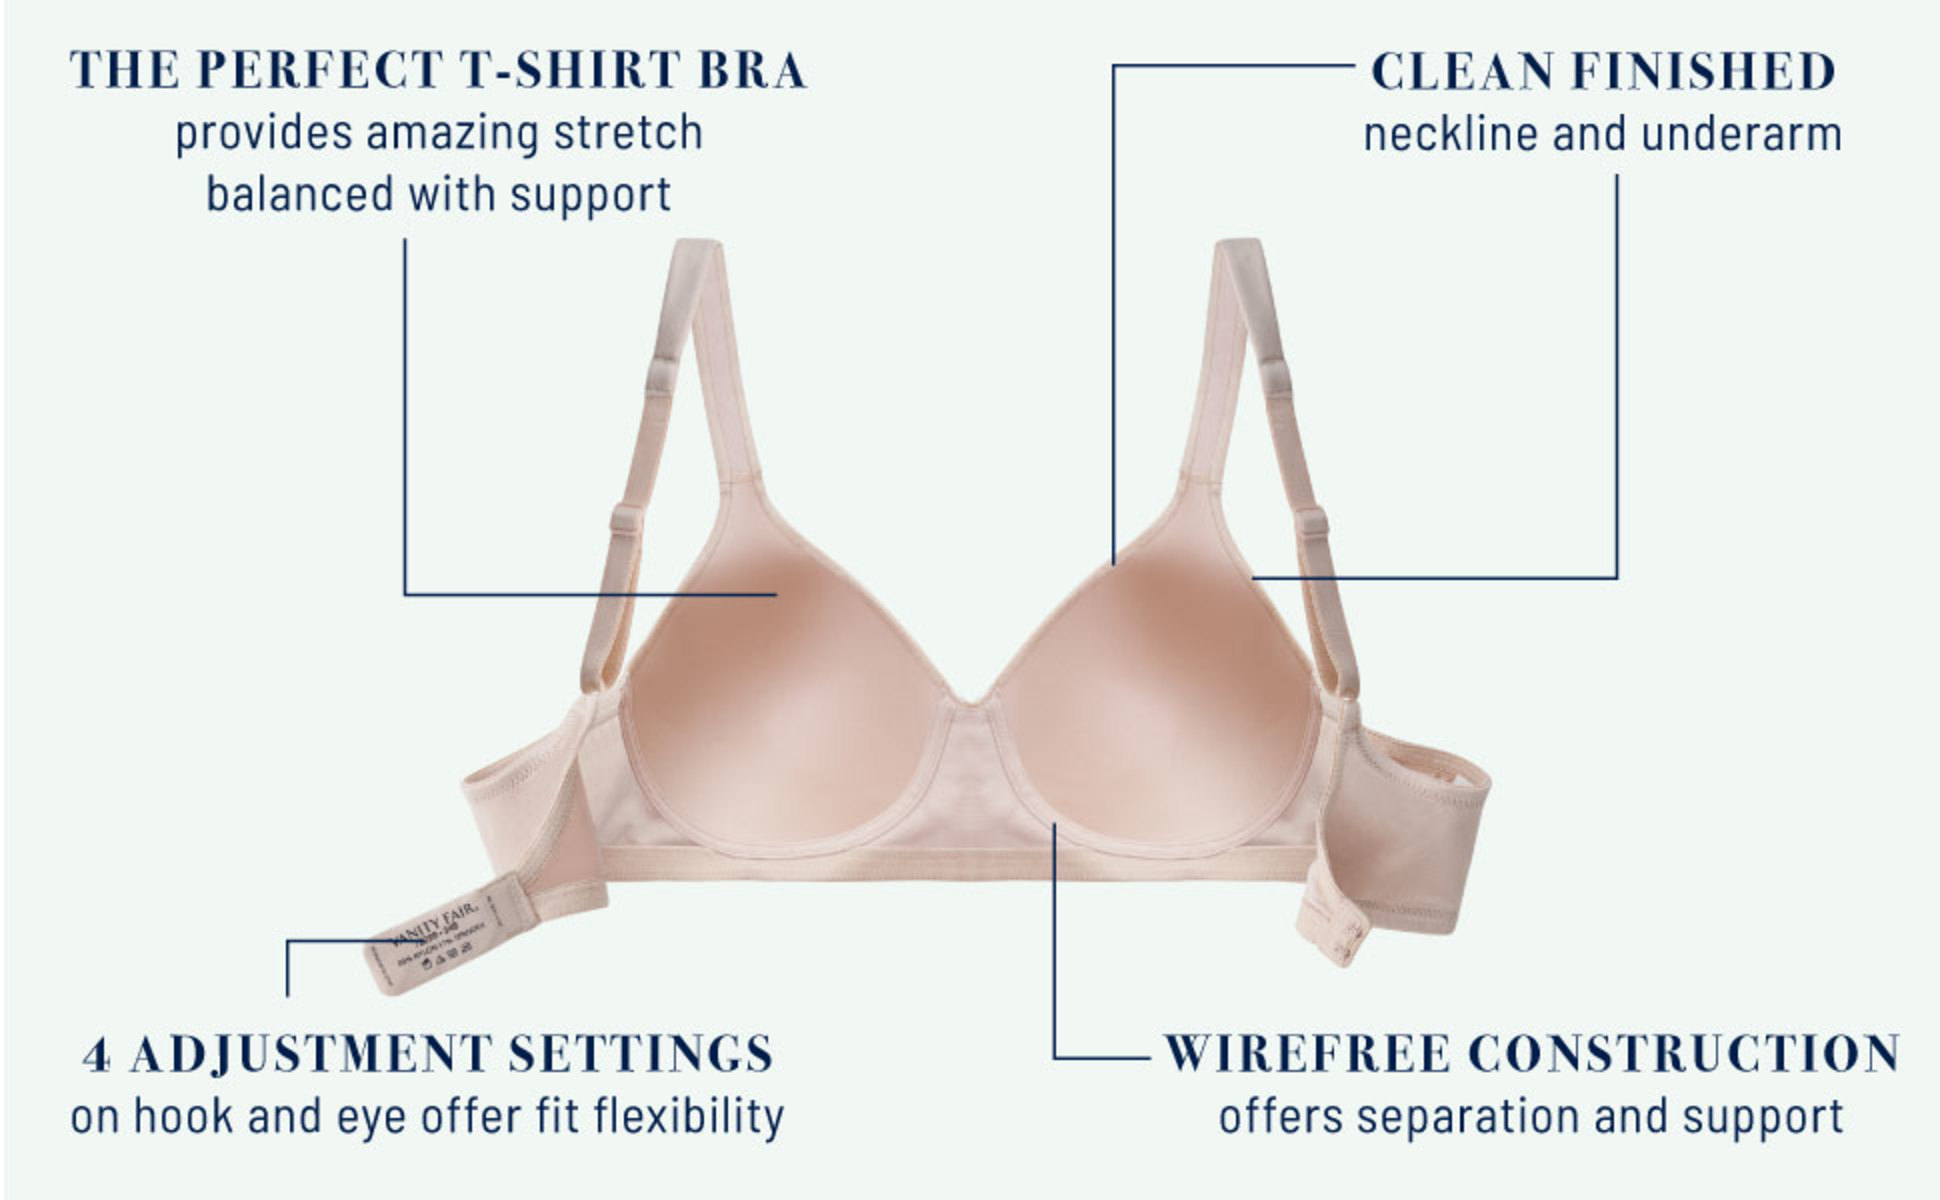 M&S - Preston Deepdale - ONLINE BRA FITTING While we're unable to offer our  bra-fitting service, why not use our online bra fit guide and bra size  calculator to find your perfect